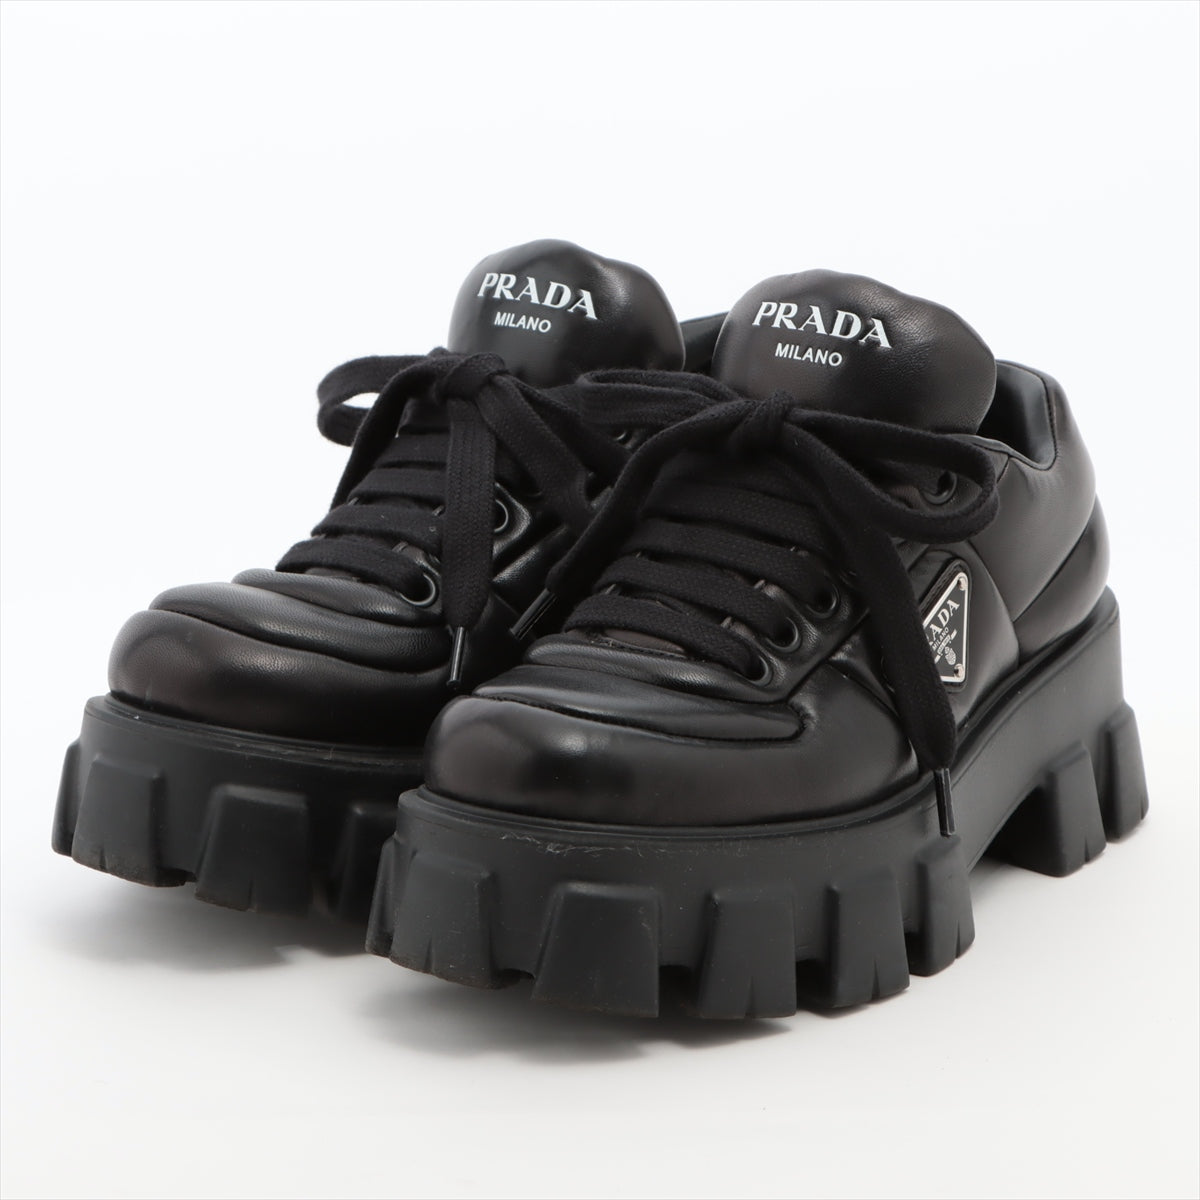 Prada Monolith Leather Sneakers 37 Ladies' Black 1E119N Triangular logo plate There is a box